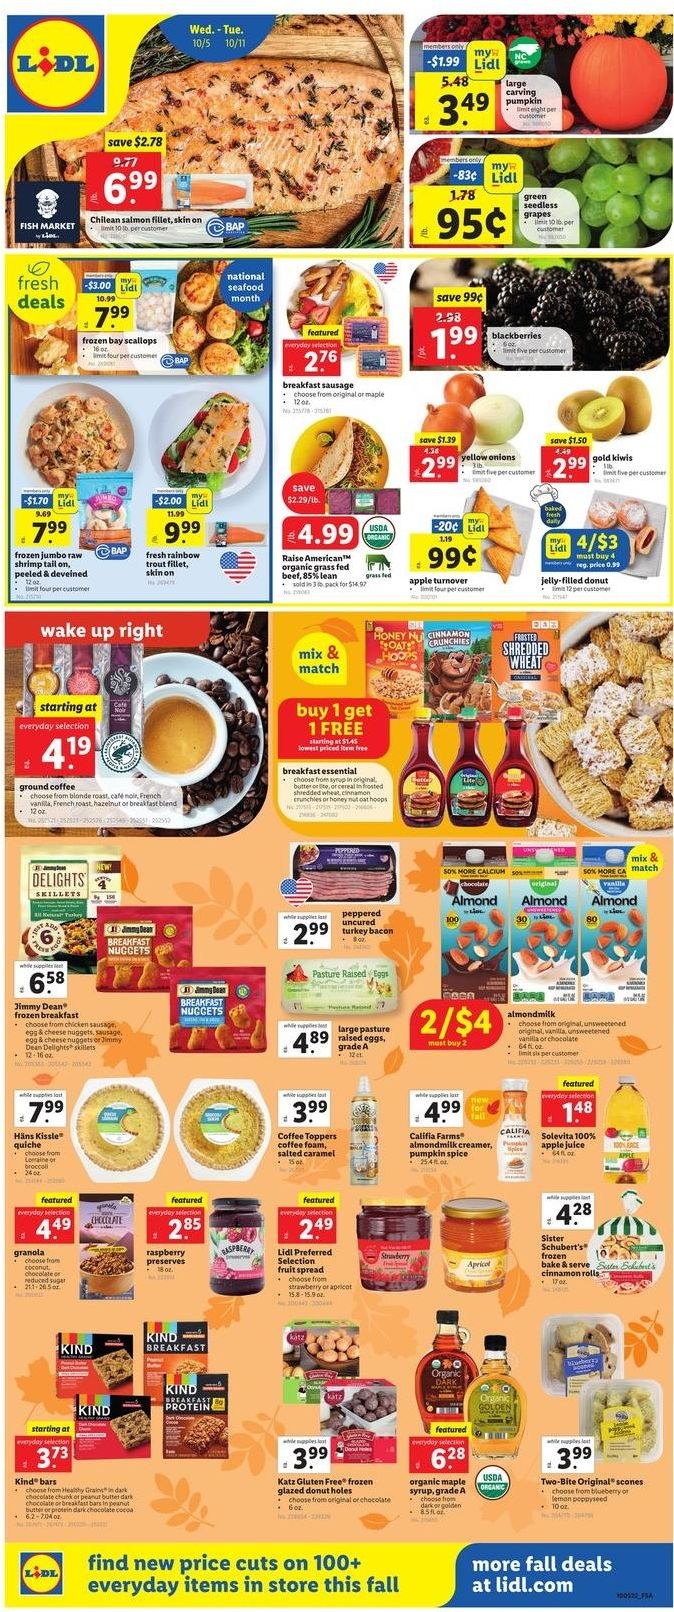 thumbnail - Lidl Flyer - 10/05/2022 - 10/11/2022 - Sales products - cinnamon roll, donut holes, onion, blackberries, grapes, kiwi, seedless grapes, coconut, salmon, salmon fillet, scallops, trout, seafood, shrimps, nuggets, cheese nuggets, Jimmy Dean, bacon, turkey bacon, sausage, almond milk, eggs, creamer, quiche, jelly, dark chocolate, granola, spice, syrup, apple juice, juice, coffee, ground coffee, breakfast blend, shades, lid, calcium. Page 1.